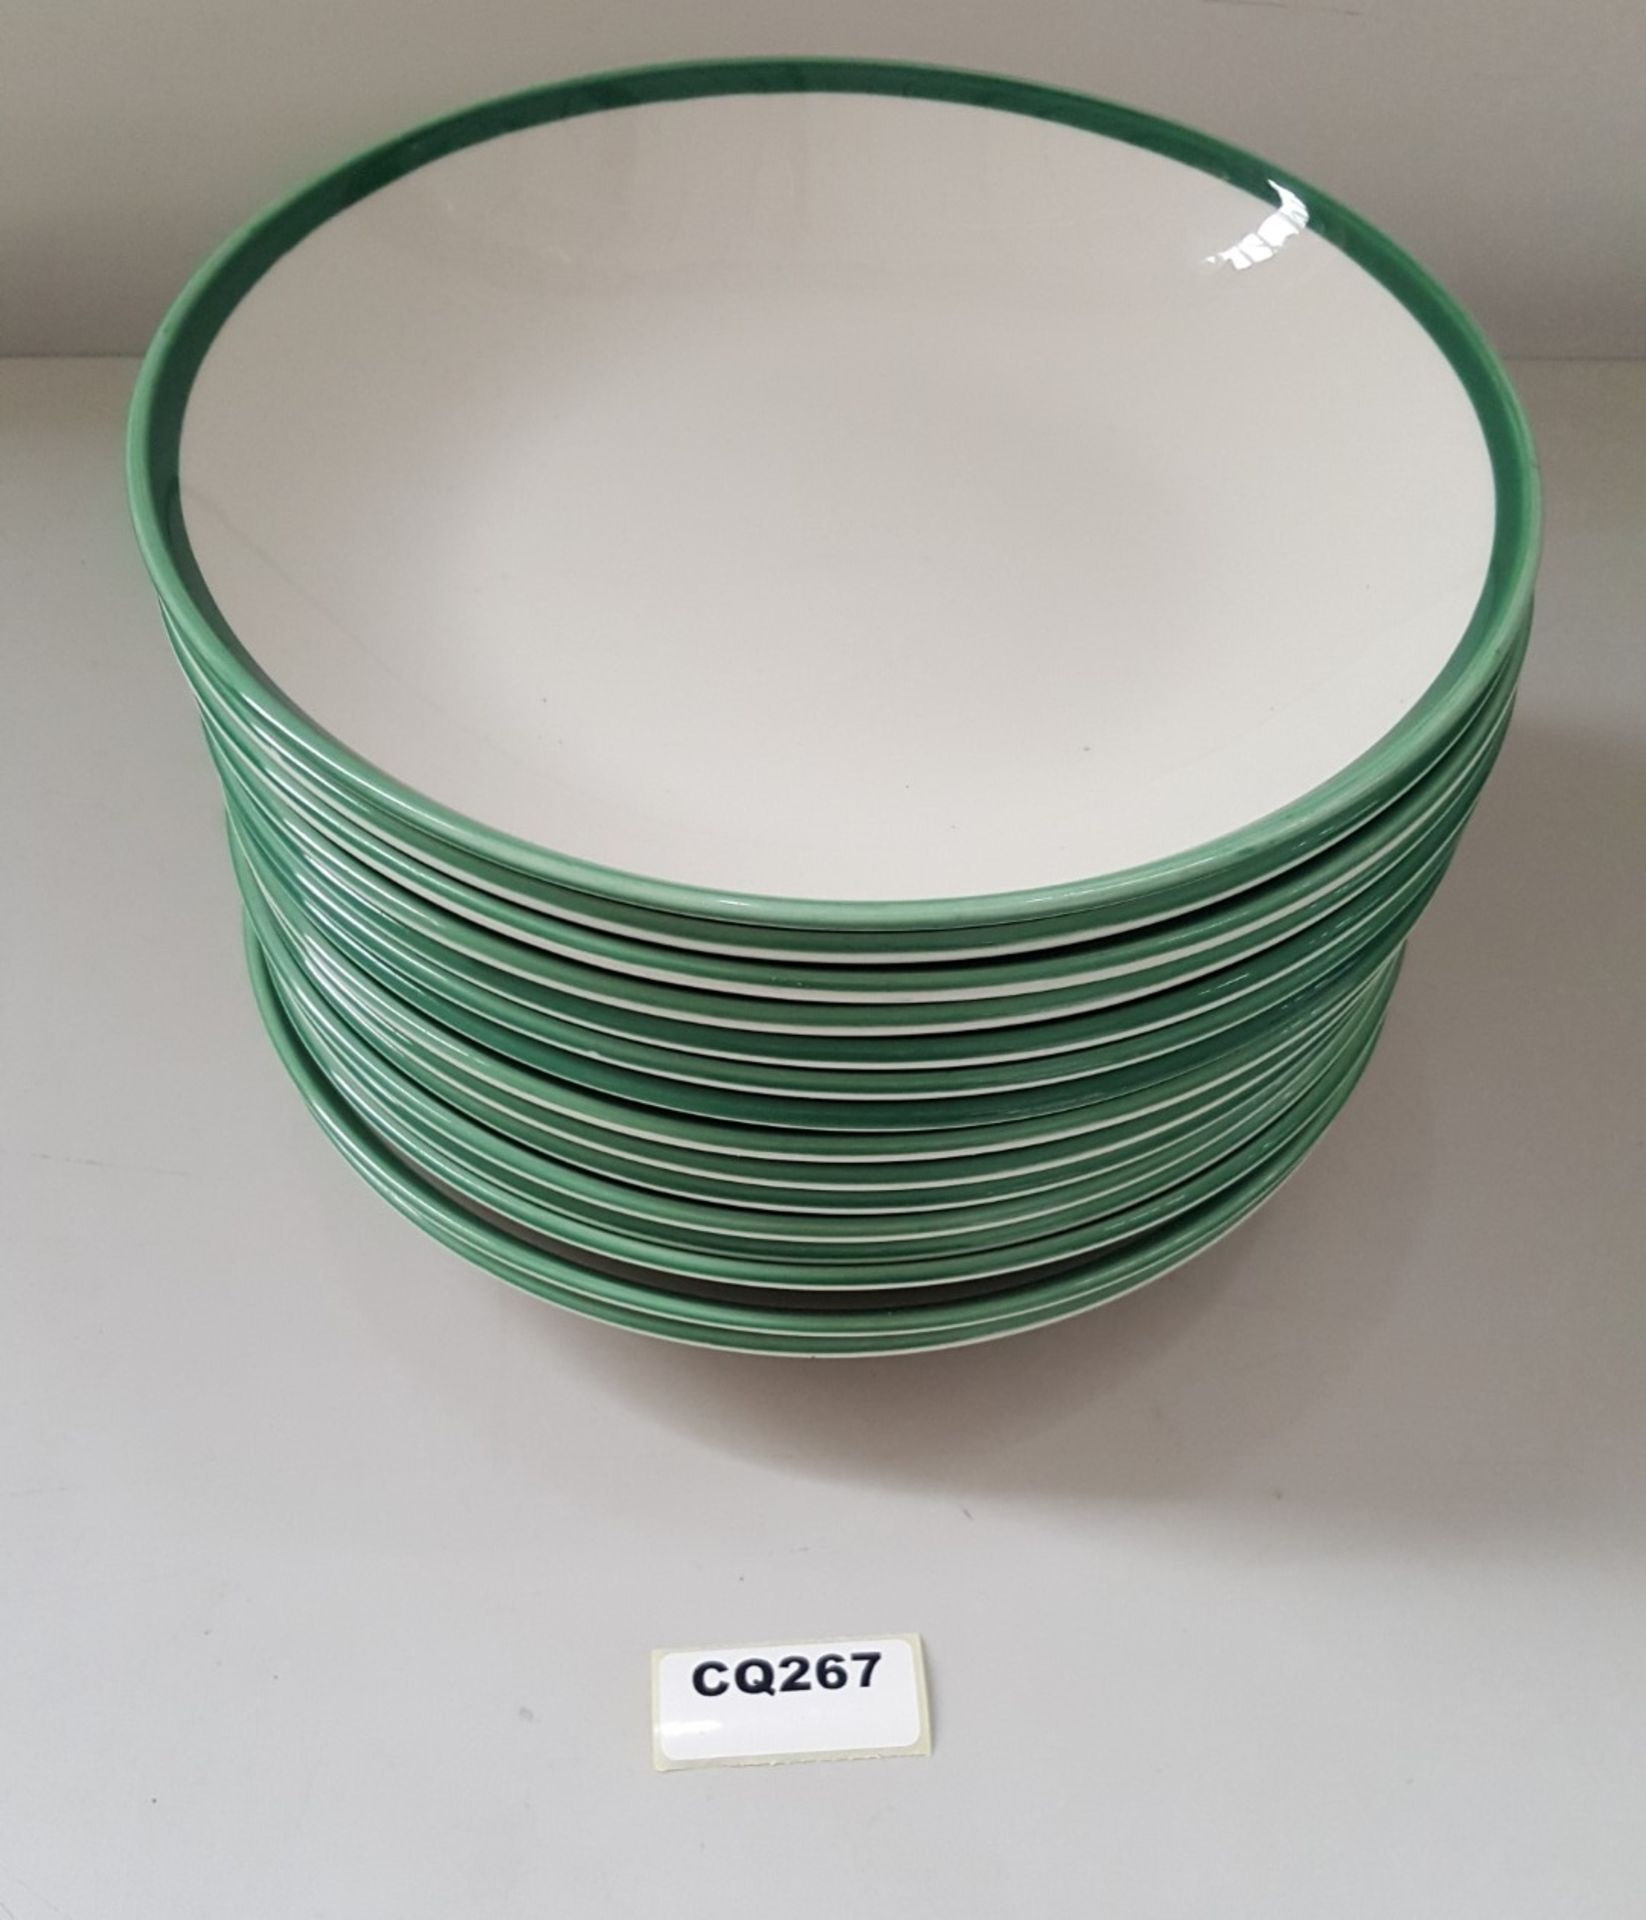 15 x Steelite Coupe Bowls White With Green Outline Egde 25CM - Ref CQ267